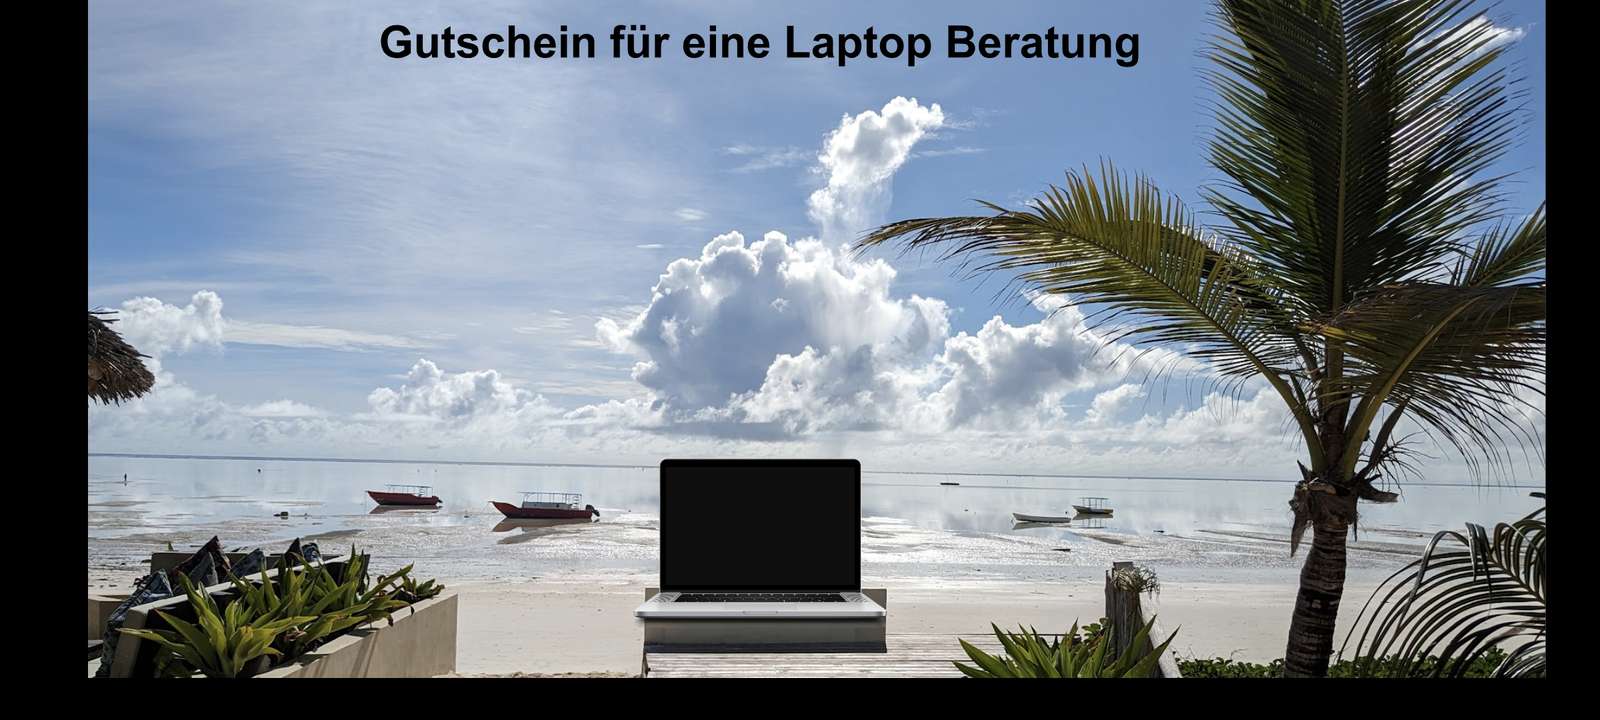 Laptop on beach puzzle online from photo